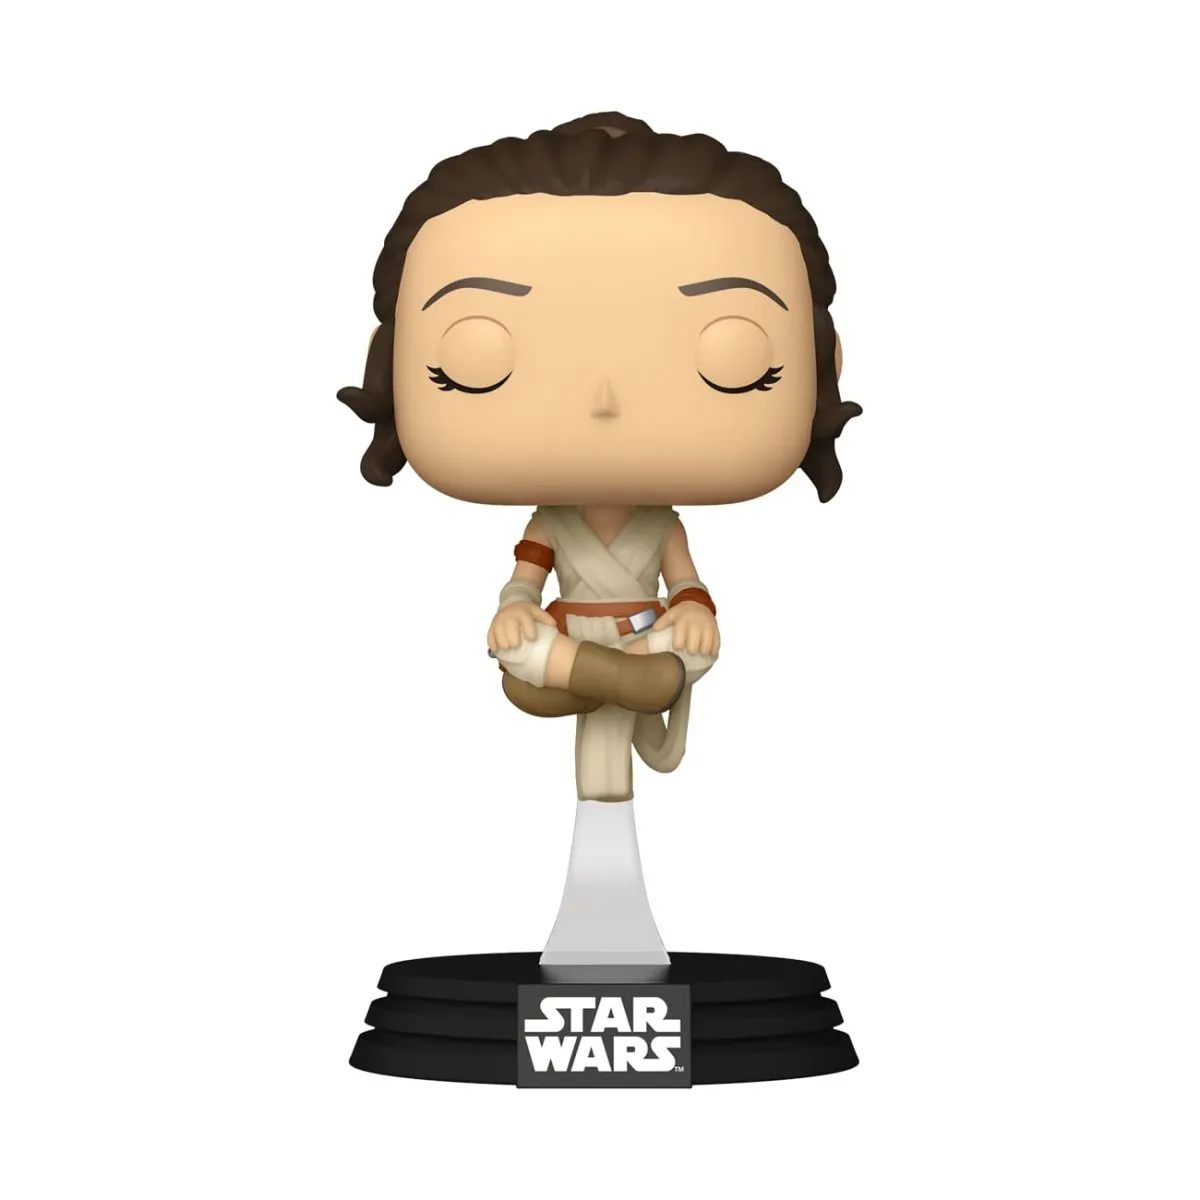 Rey Funko Pop, displayed out of box